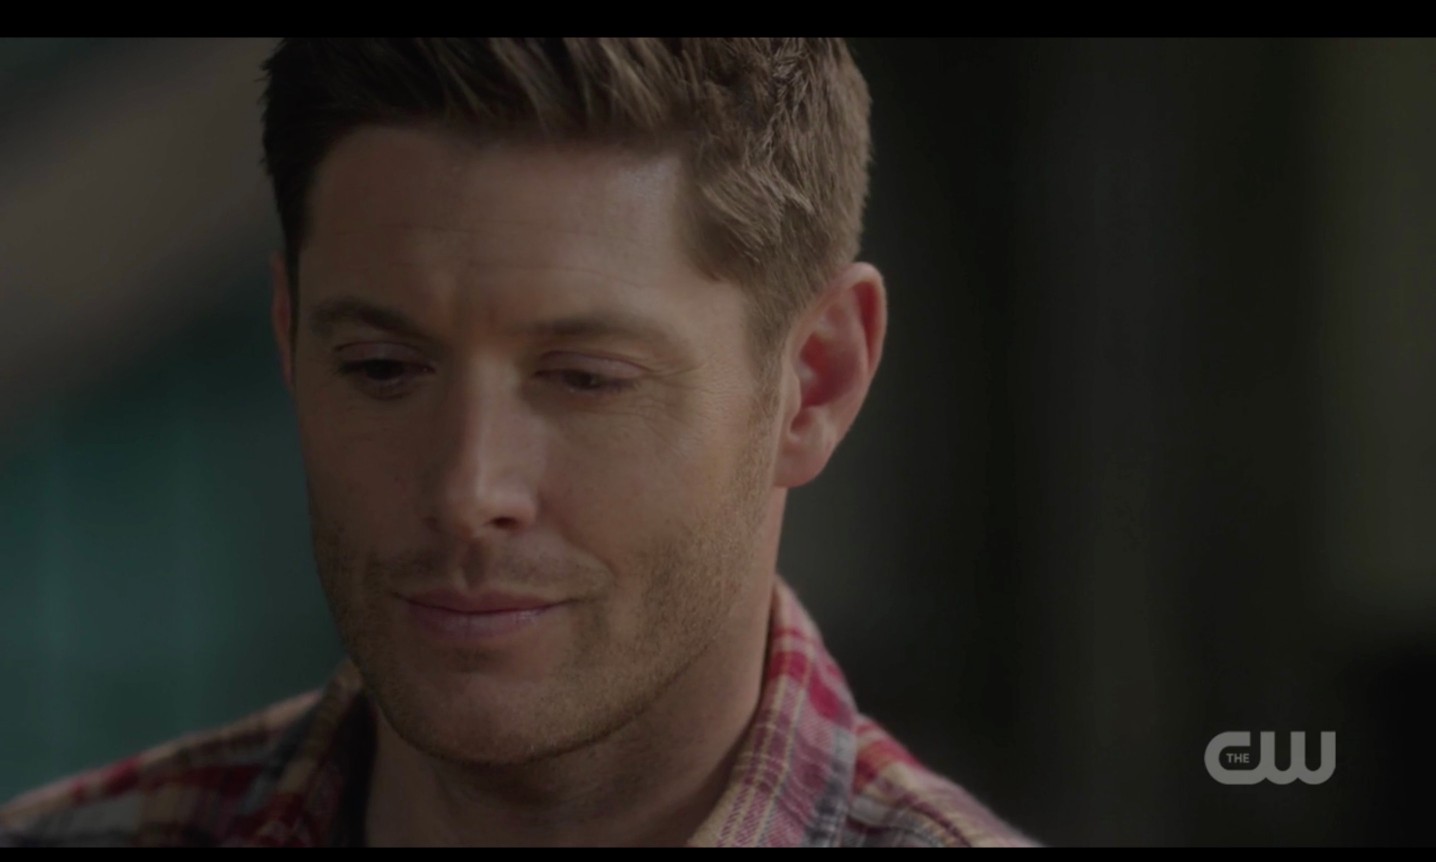 dean winchester frustrated about 1320 missing mary and jack with sam